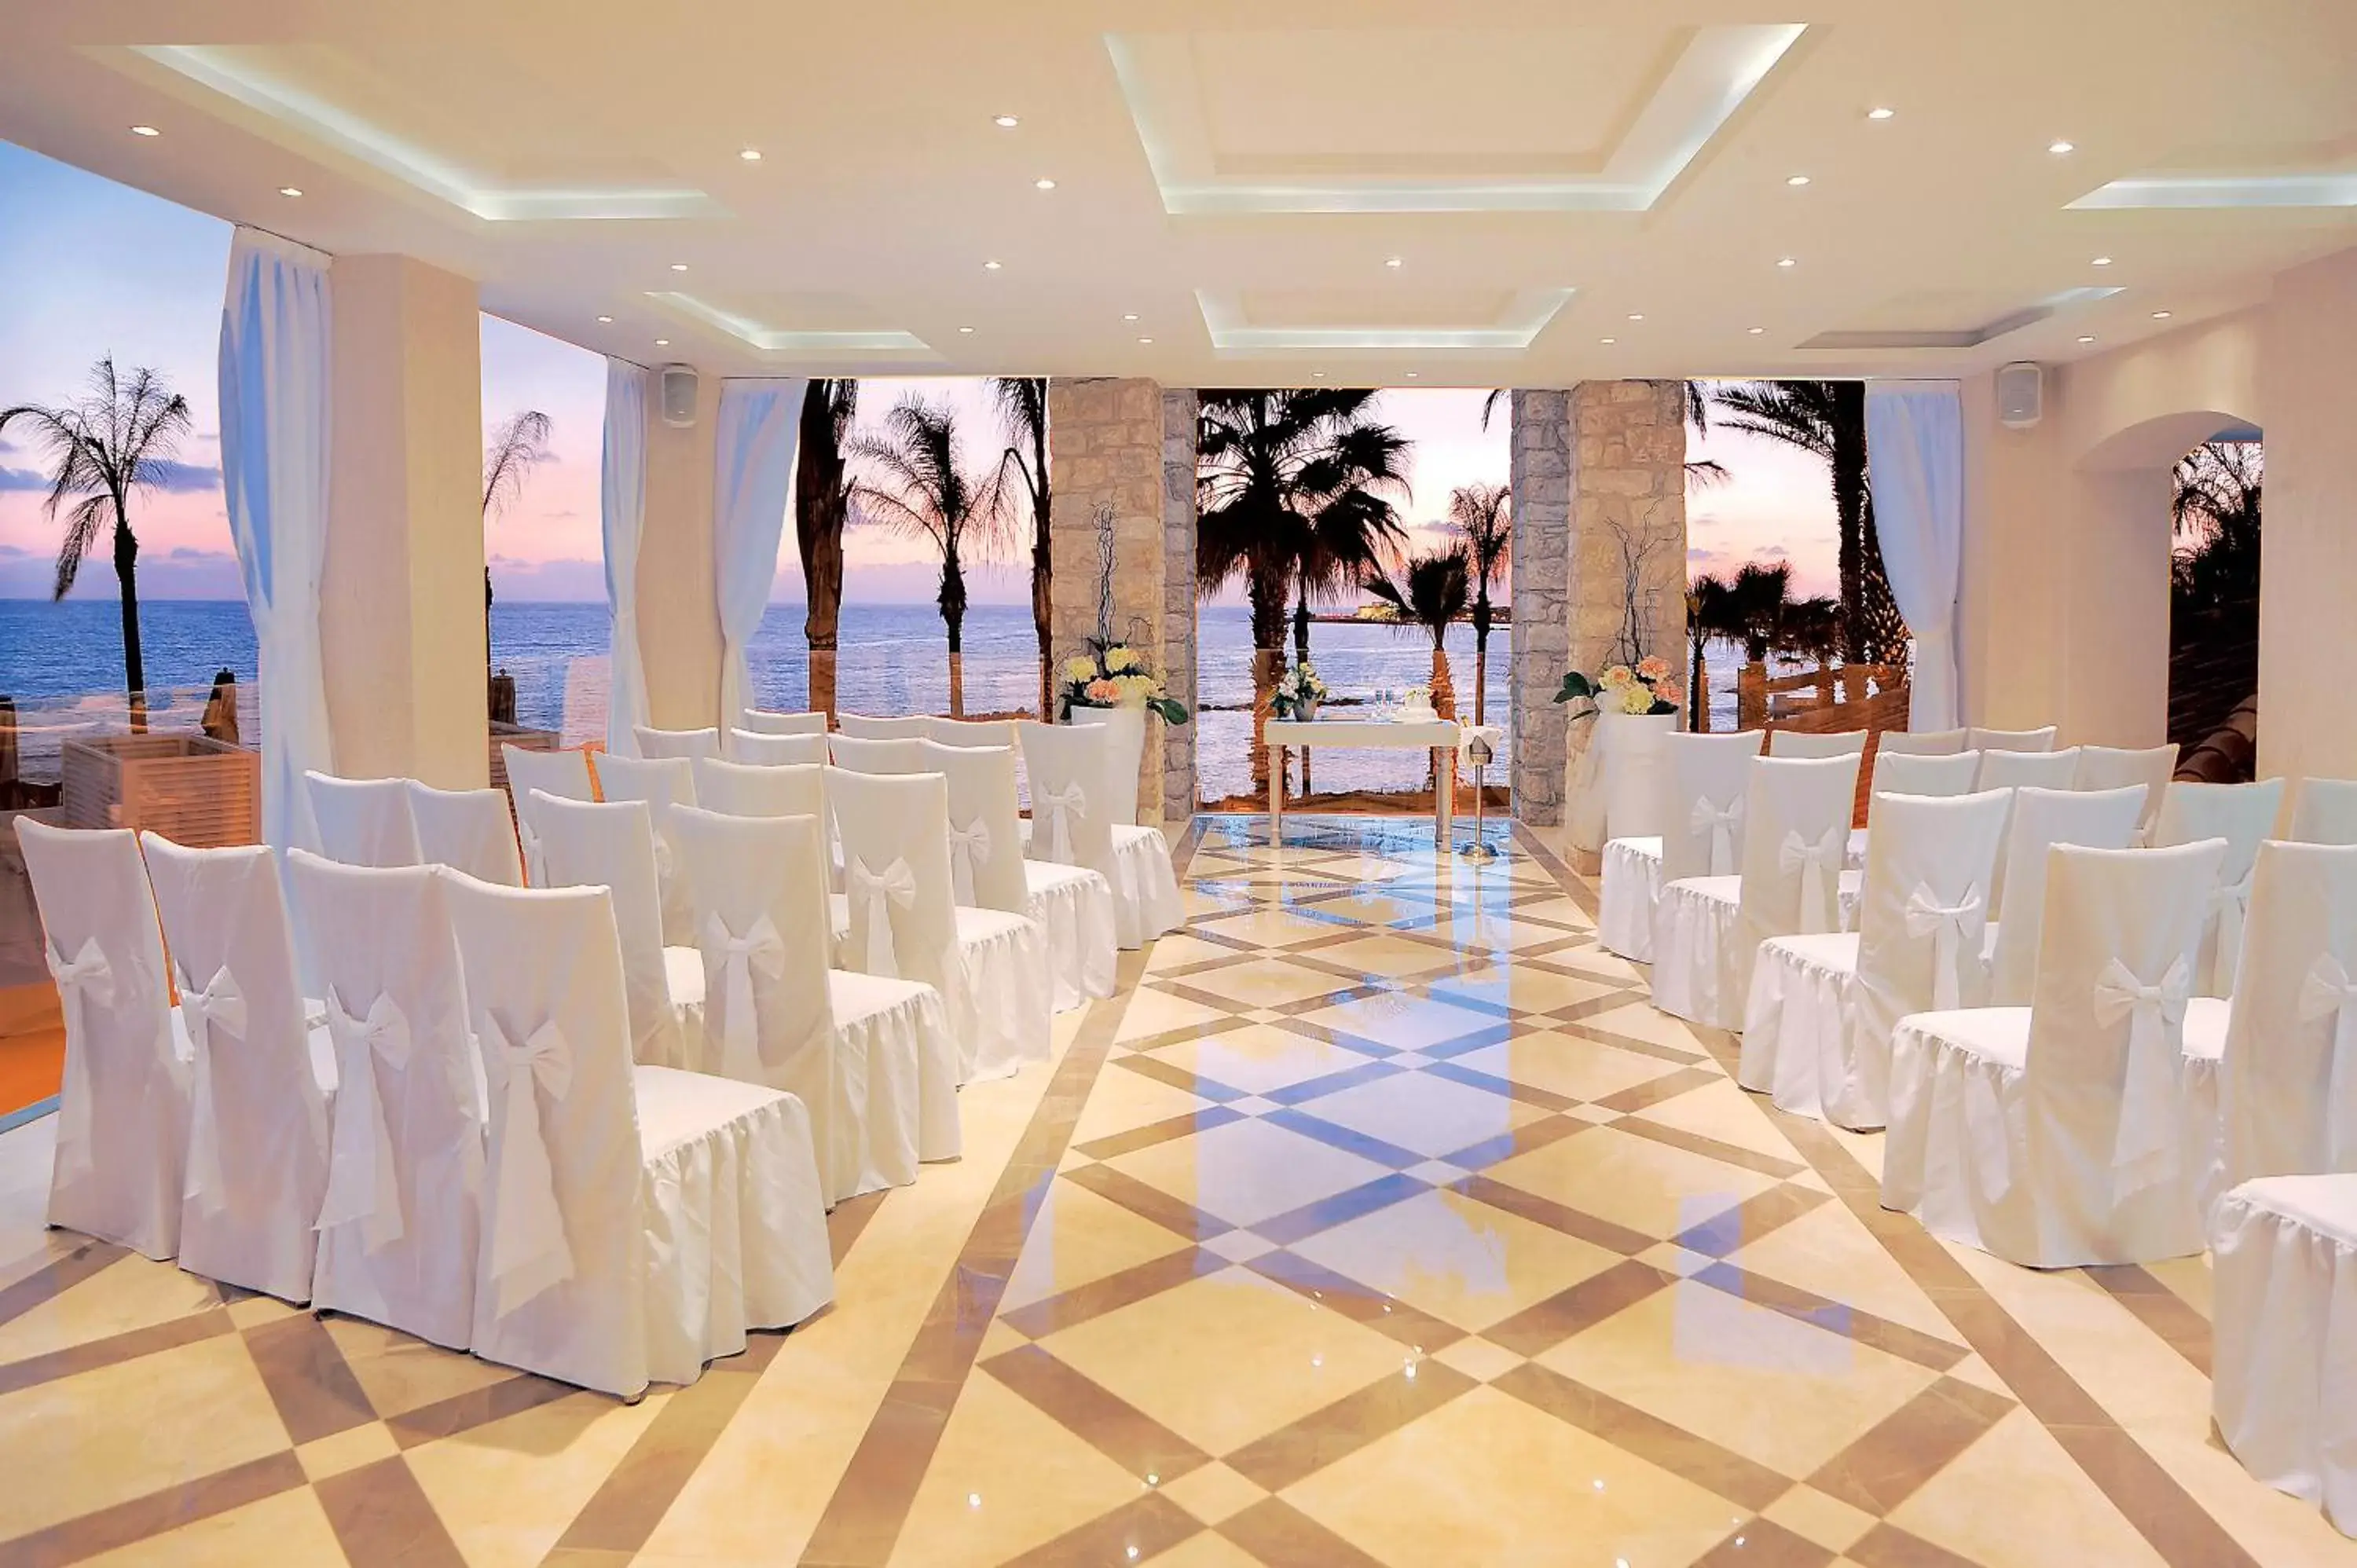 Banquet/Function facilities, Banquet Facilities in Alexander The Great Beach Hotel